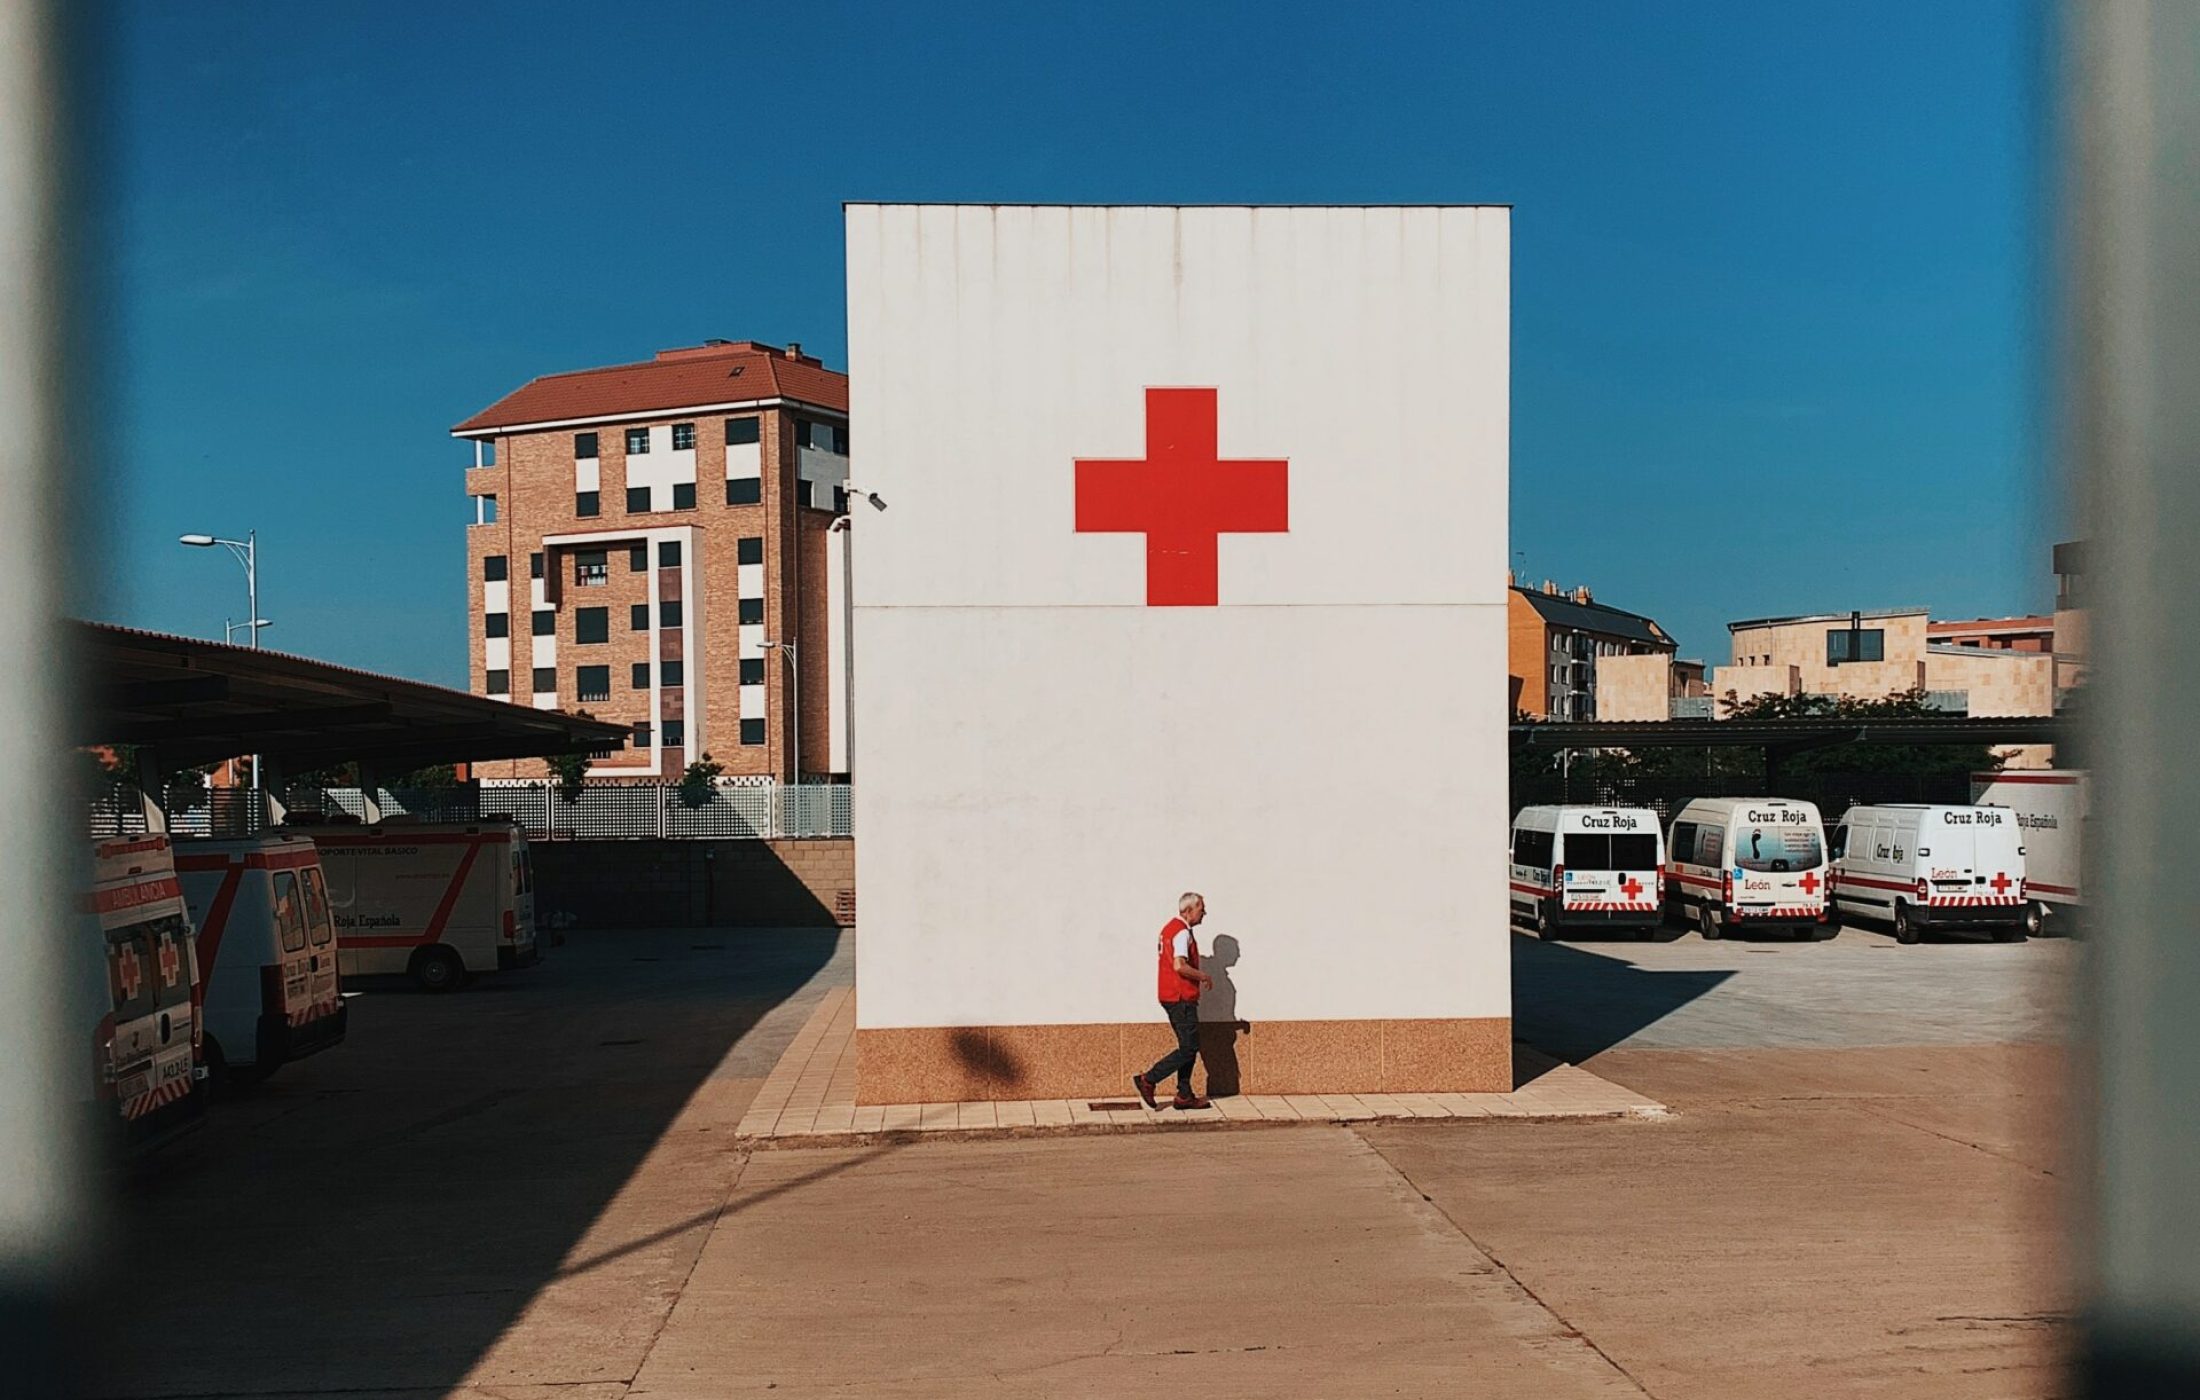 White building with red aid sign